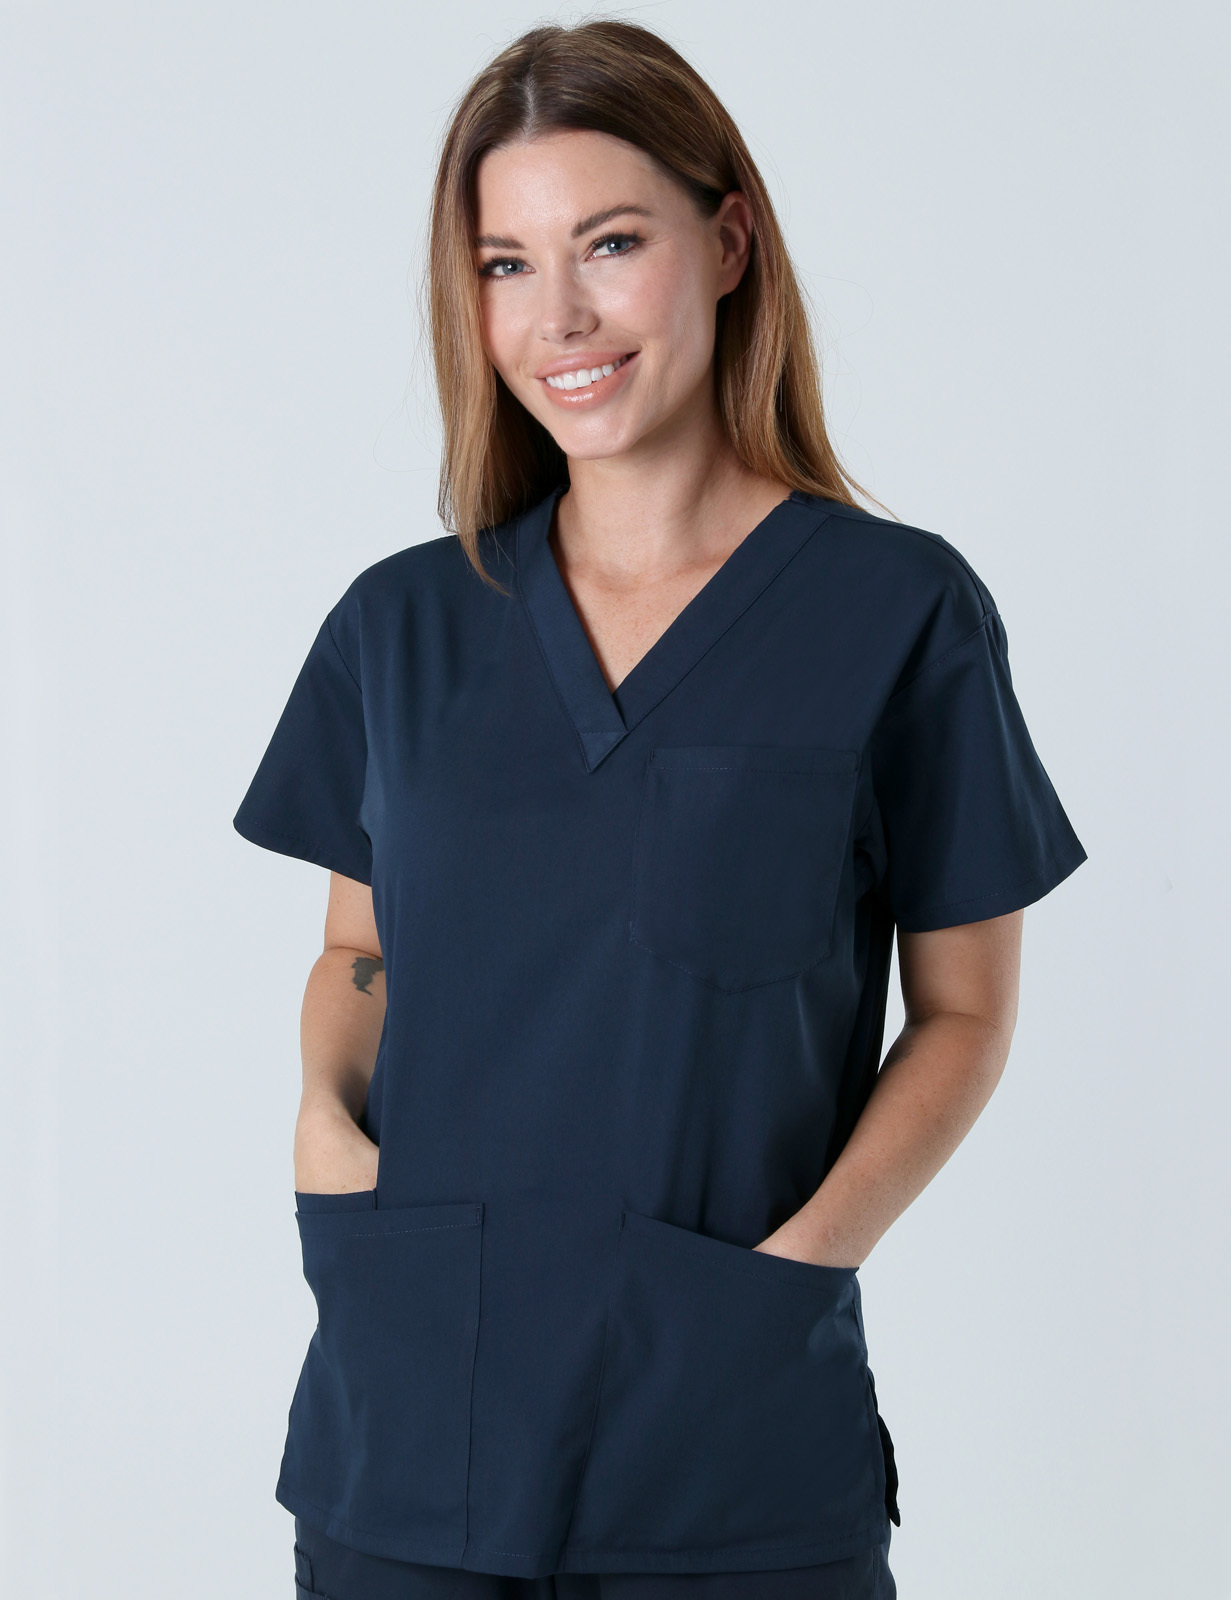 The Alfred Hospital - 2F Medical Short Stay - Nursing (4 Pocket Scrub Top and Cargo Pants in Navy incl Logos)